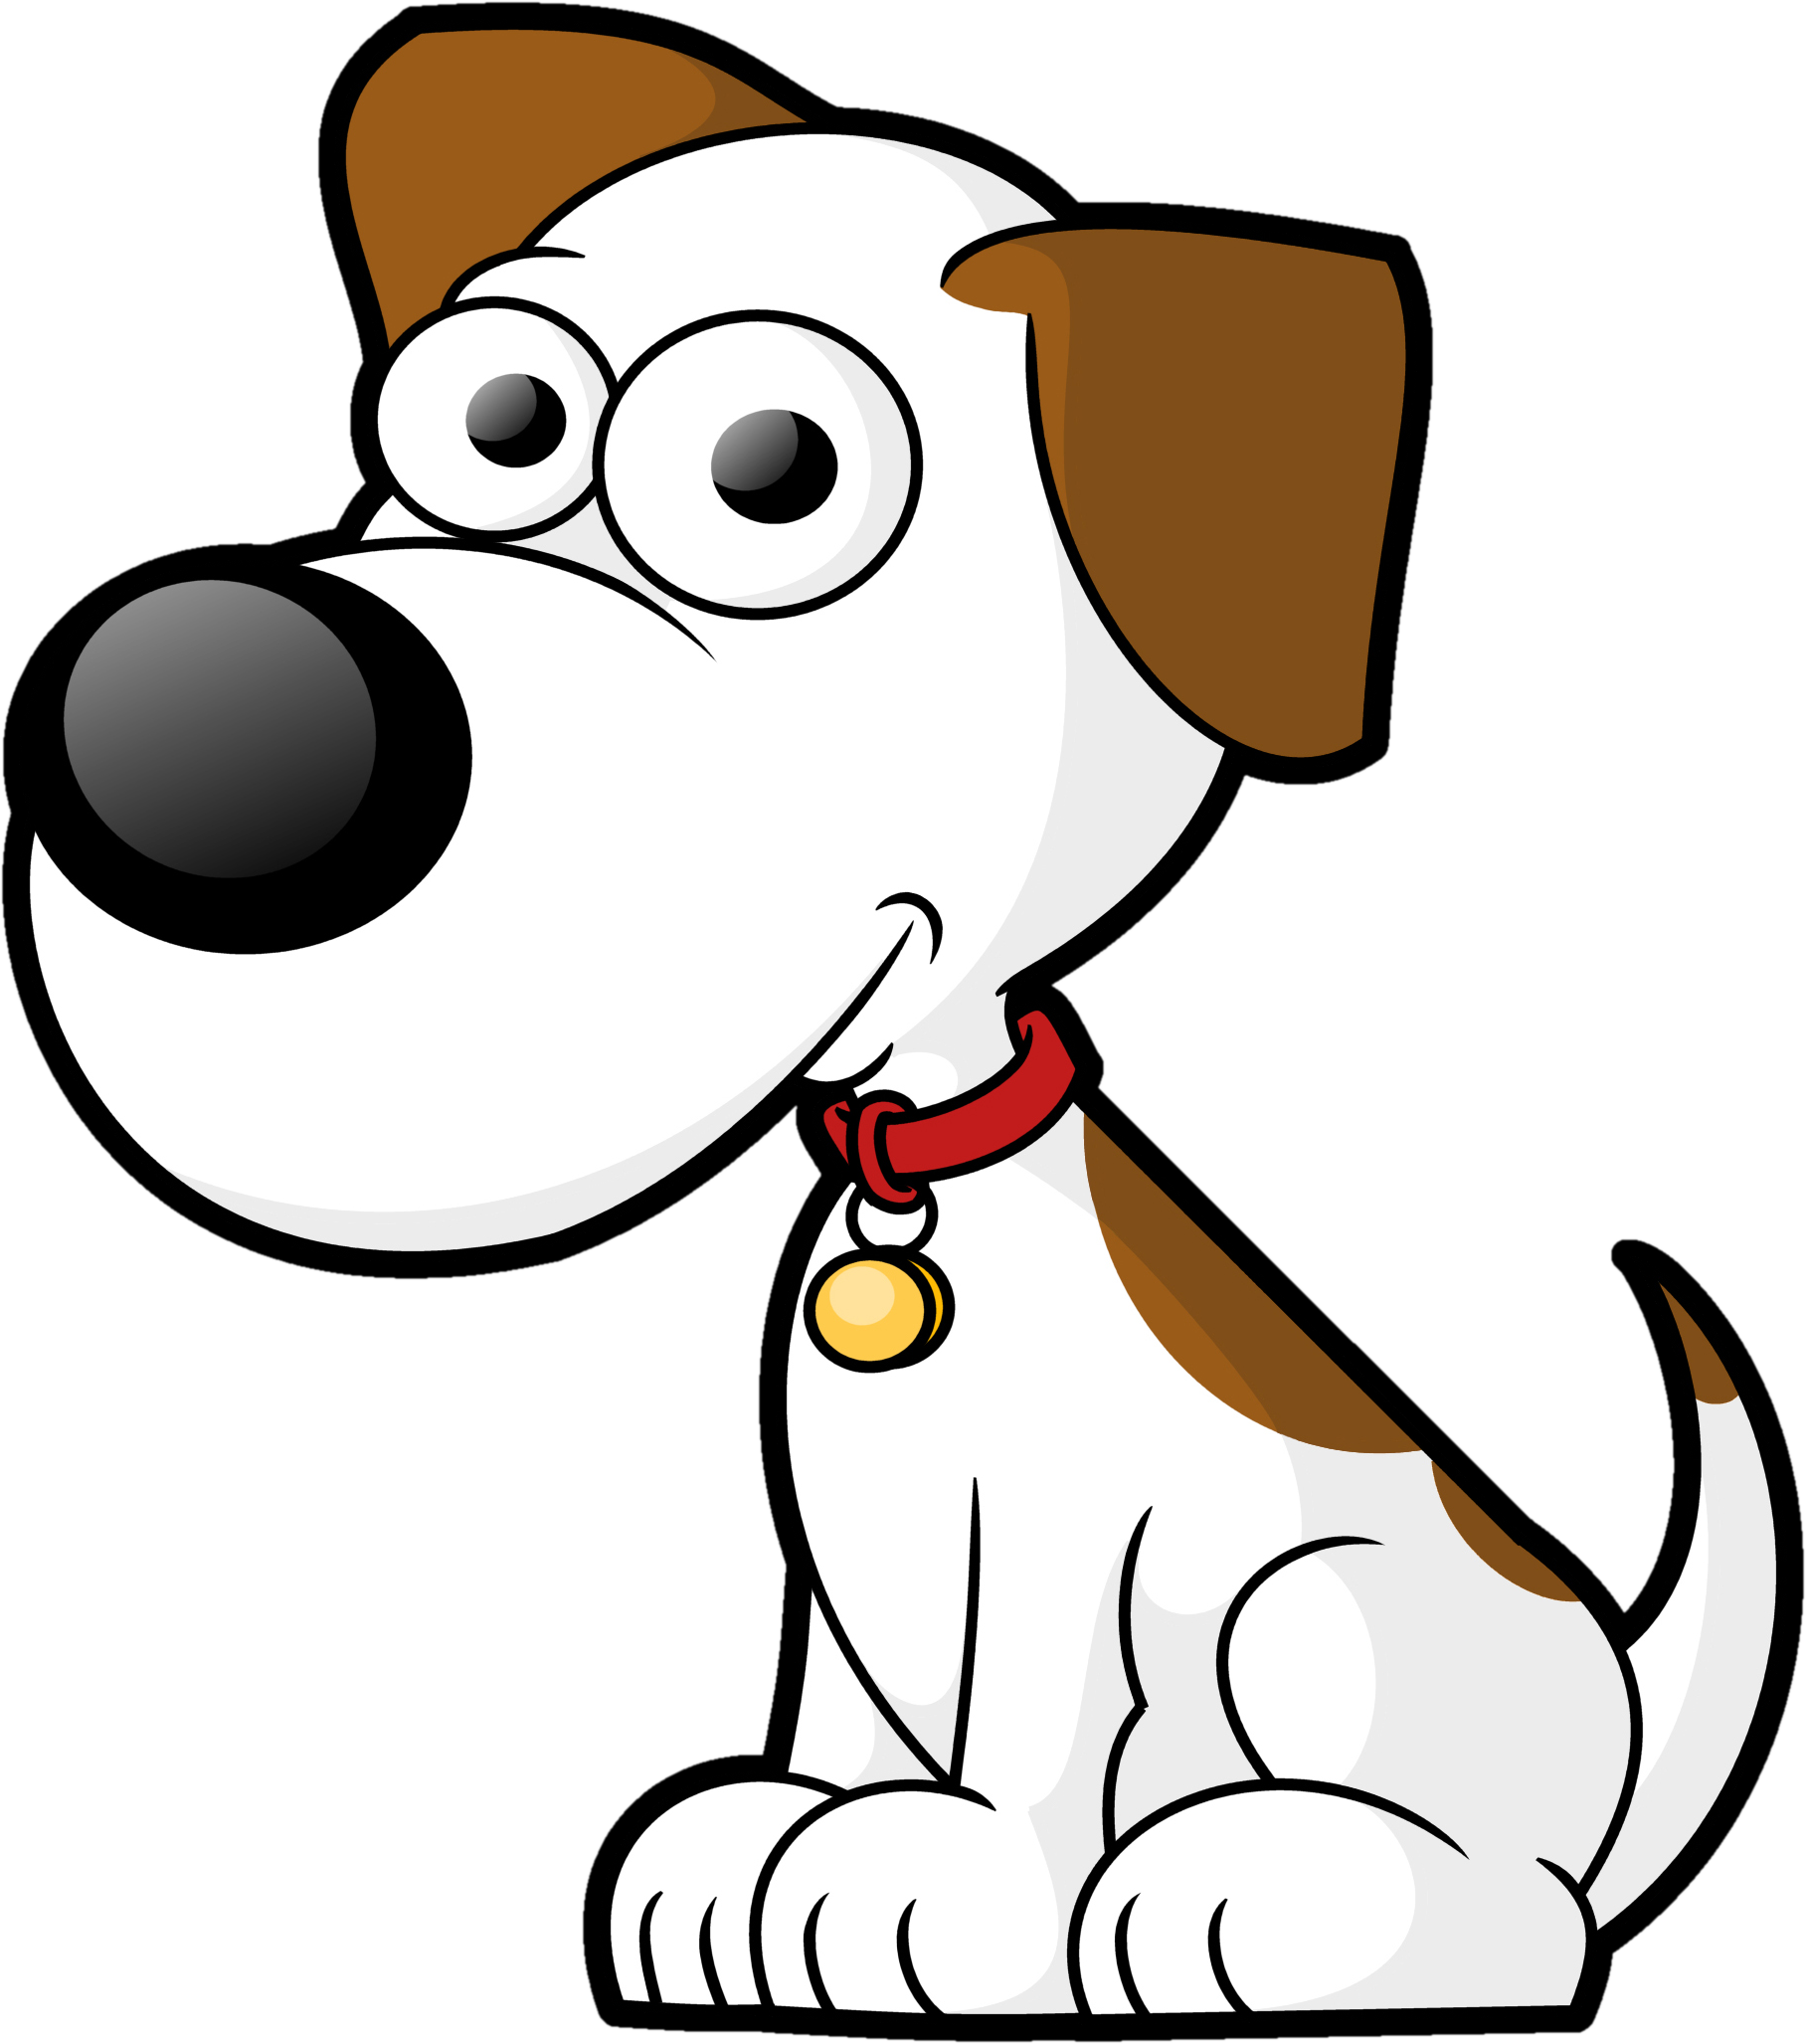 Animation clip art of dogs.